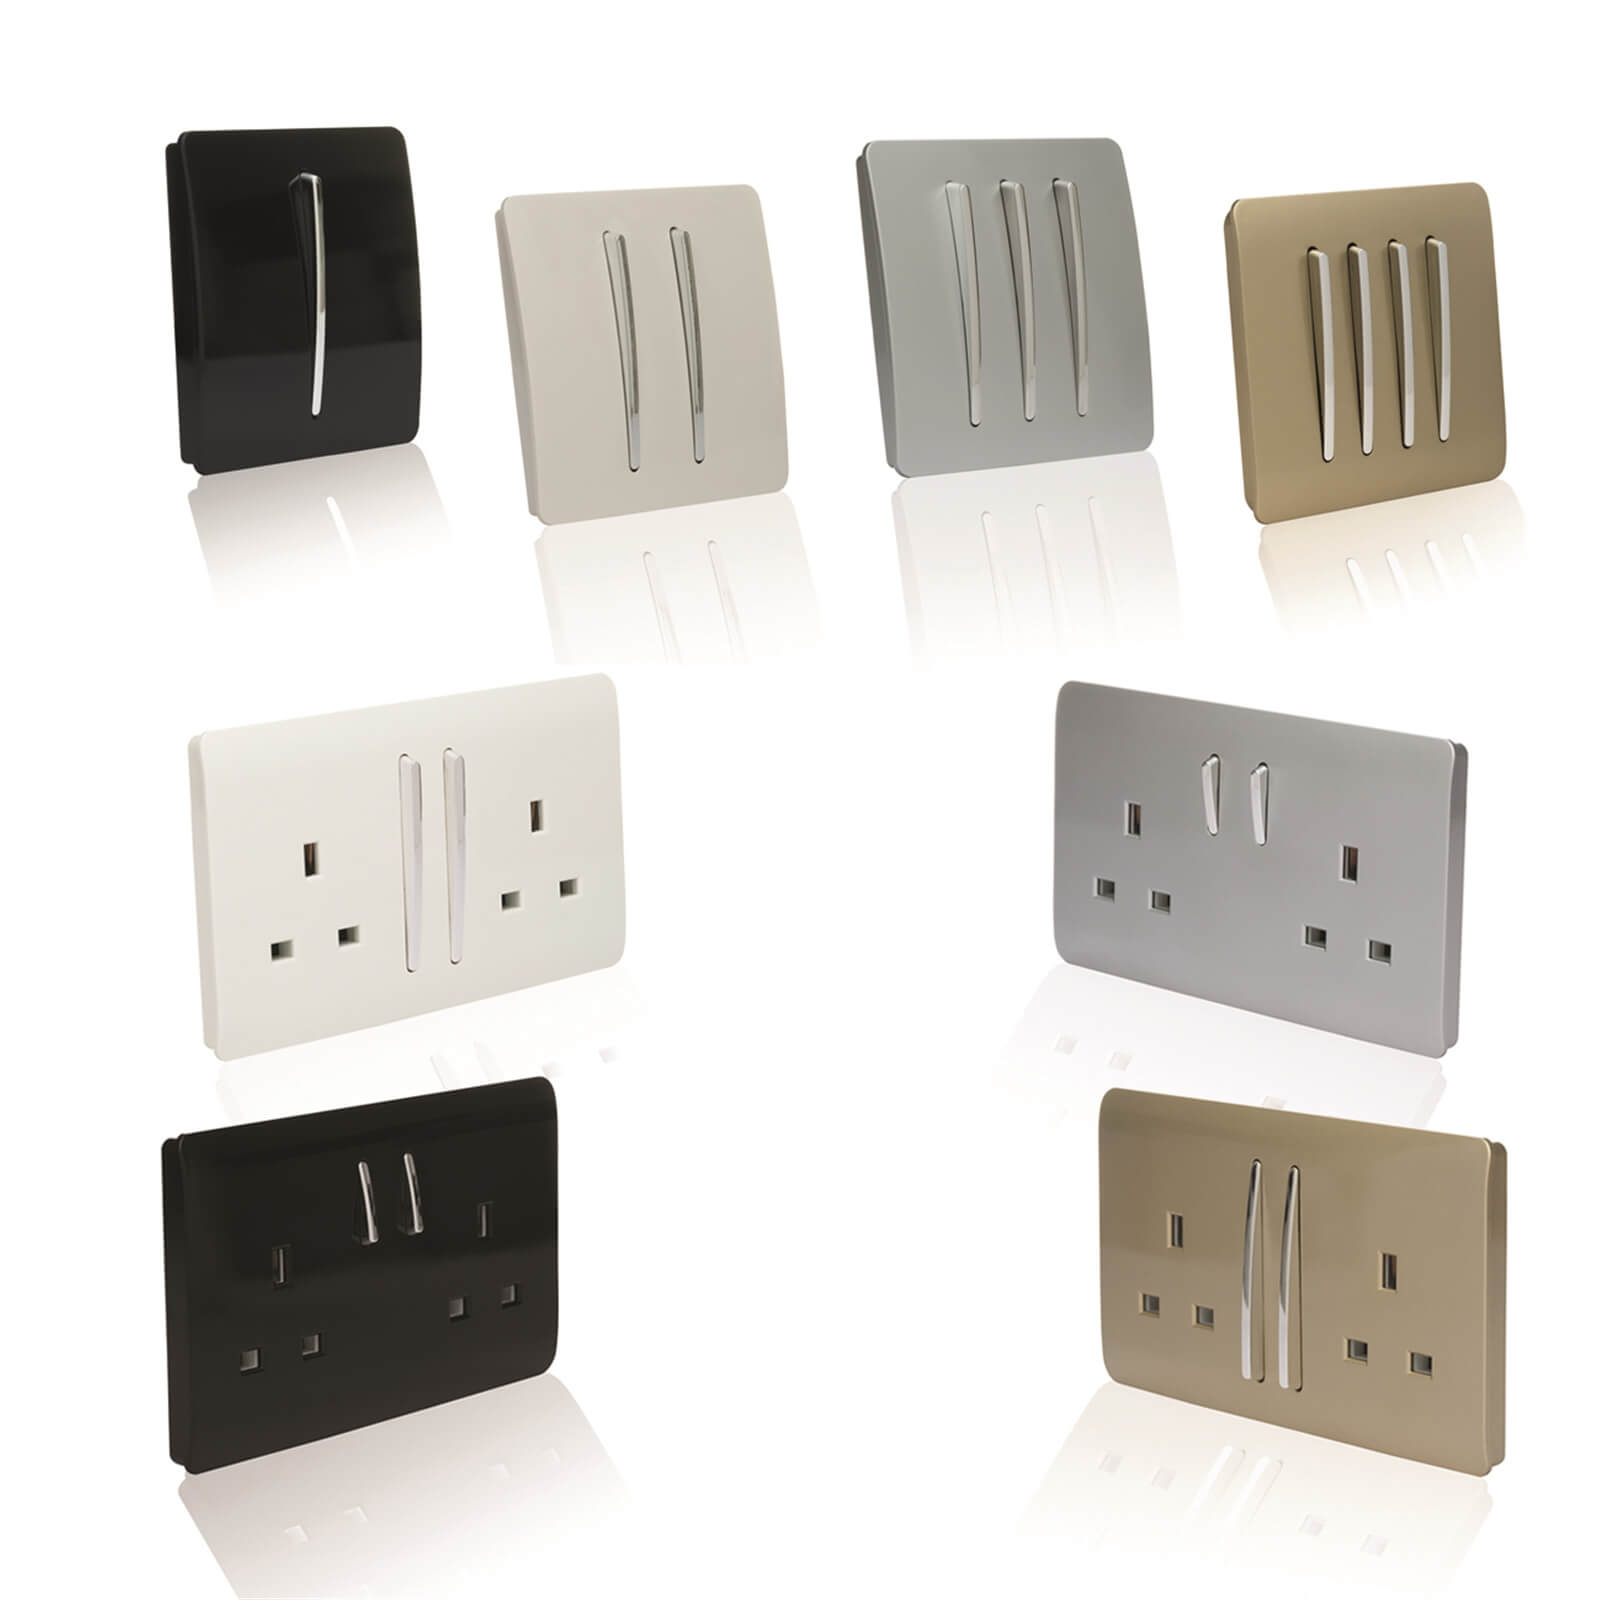 Trendi Switch TV Co-axial and PC Ethernet Sockets in Screwless Silver